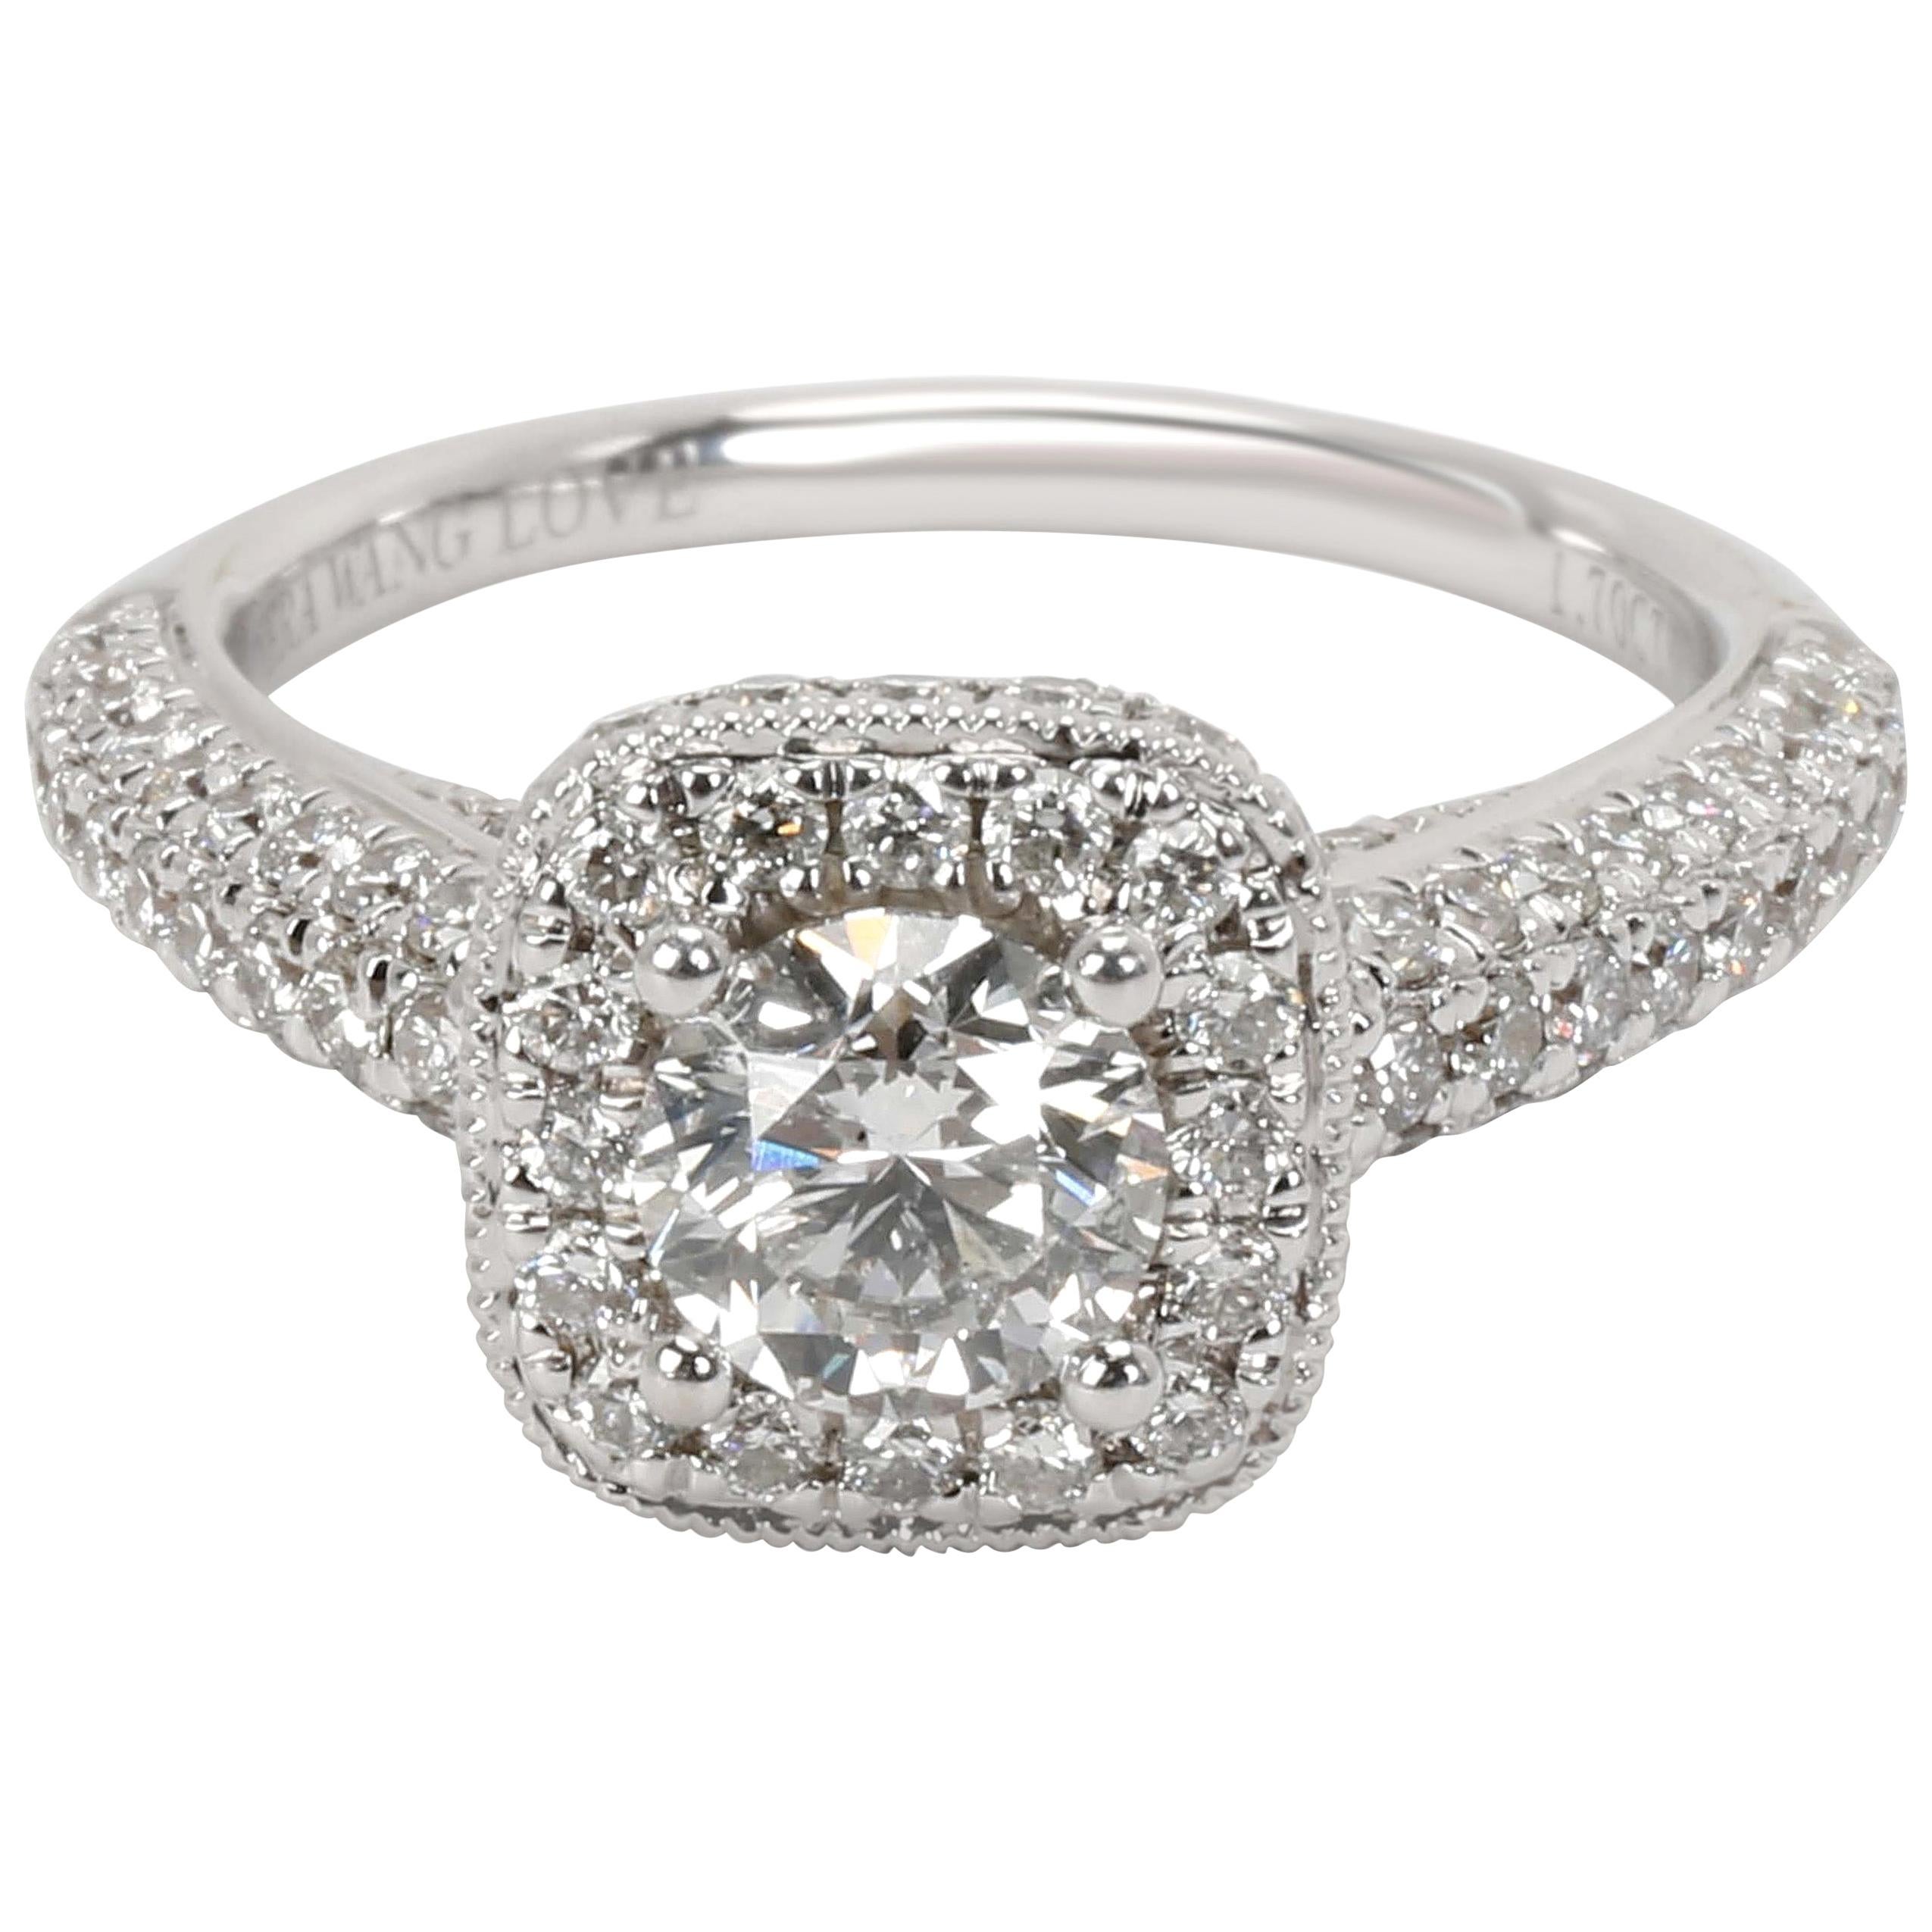 Vera Wang Love Collection Halo Diamond Engagement Ring in 18K White Gold 1.7 CTW